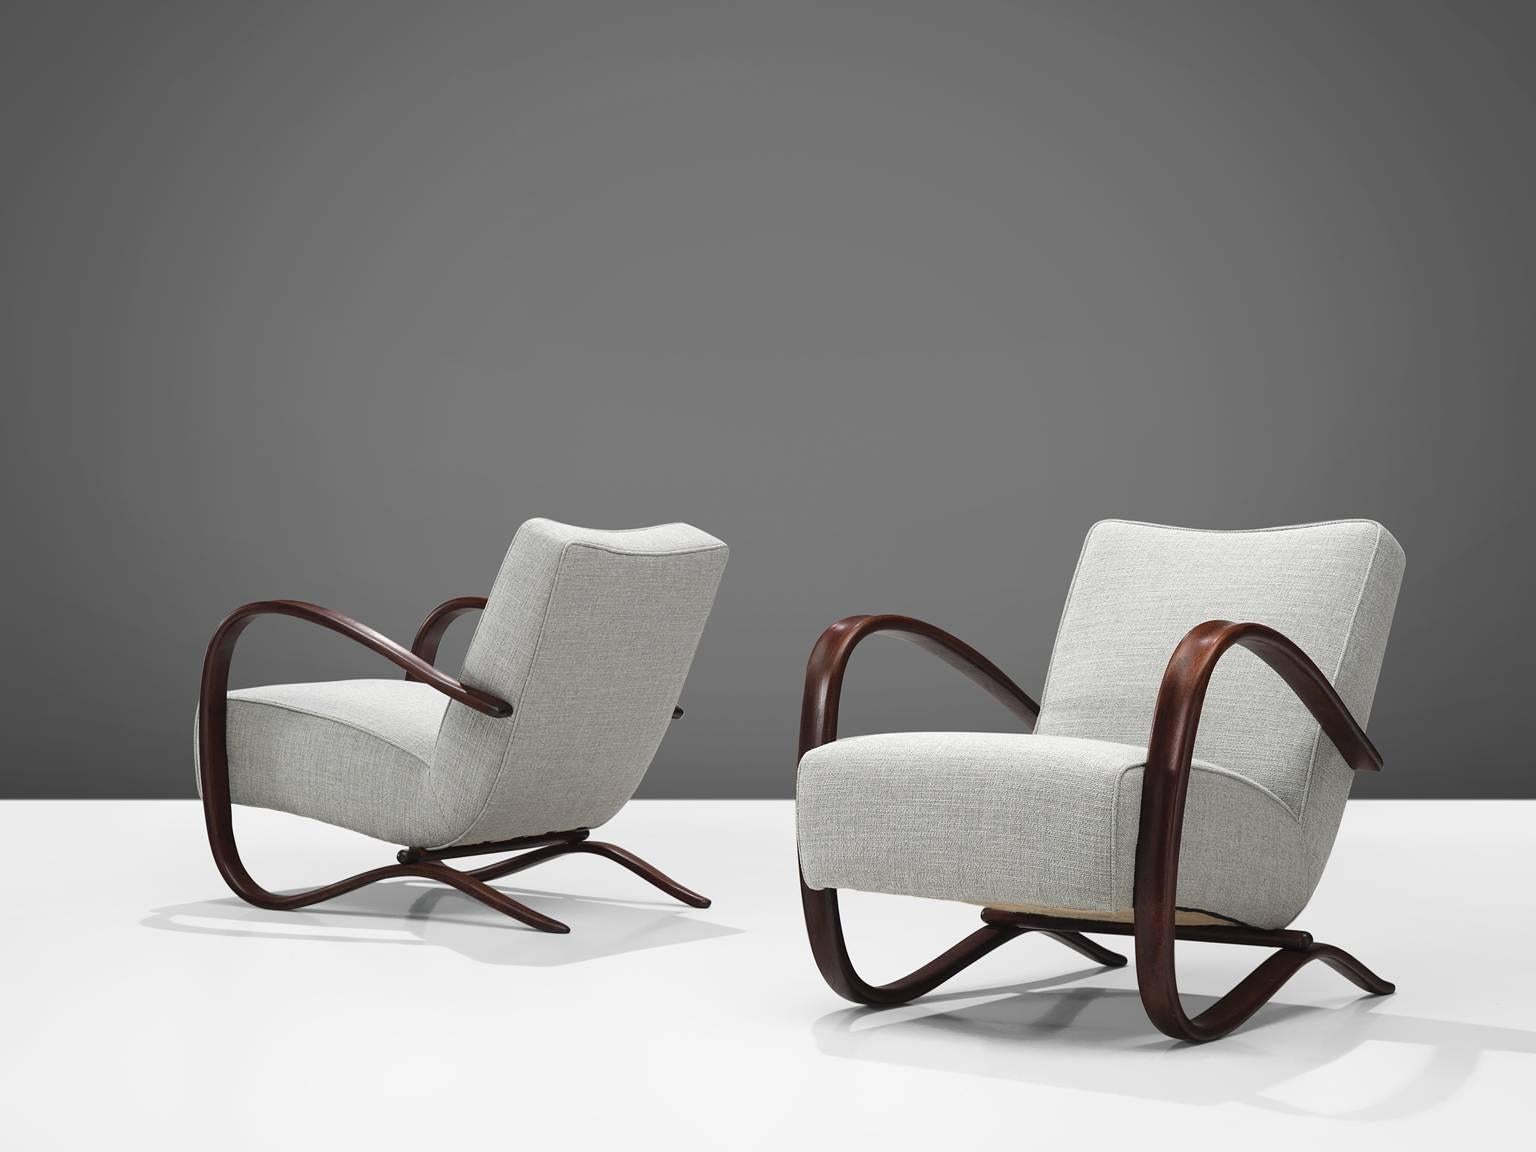 Jindrich Halabala, lounge chairs, grey fabric and stained beech, Czech Republic, 1930s. 

This extraordinary pair of Halabala chairs is part of our customized midcentury design collection. The easy chairs are upholstered with grey - off white